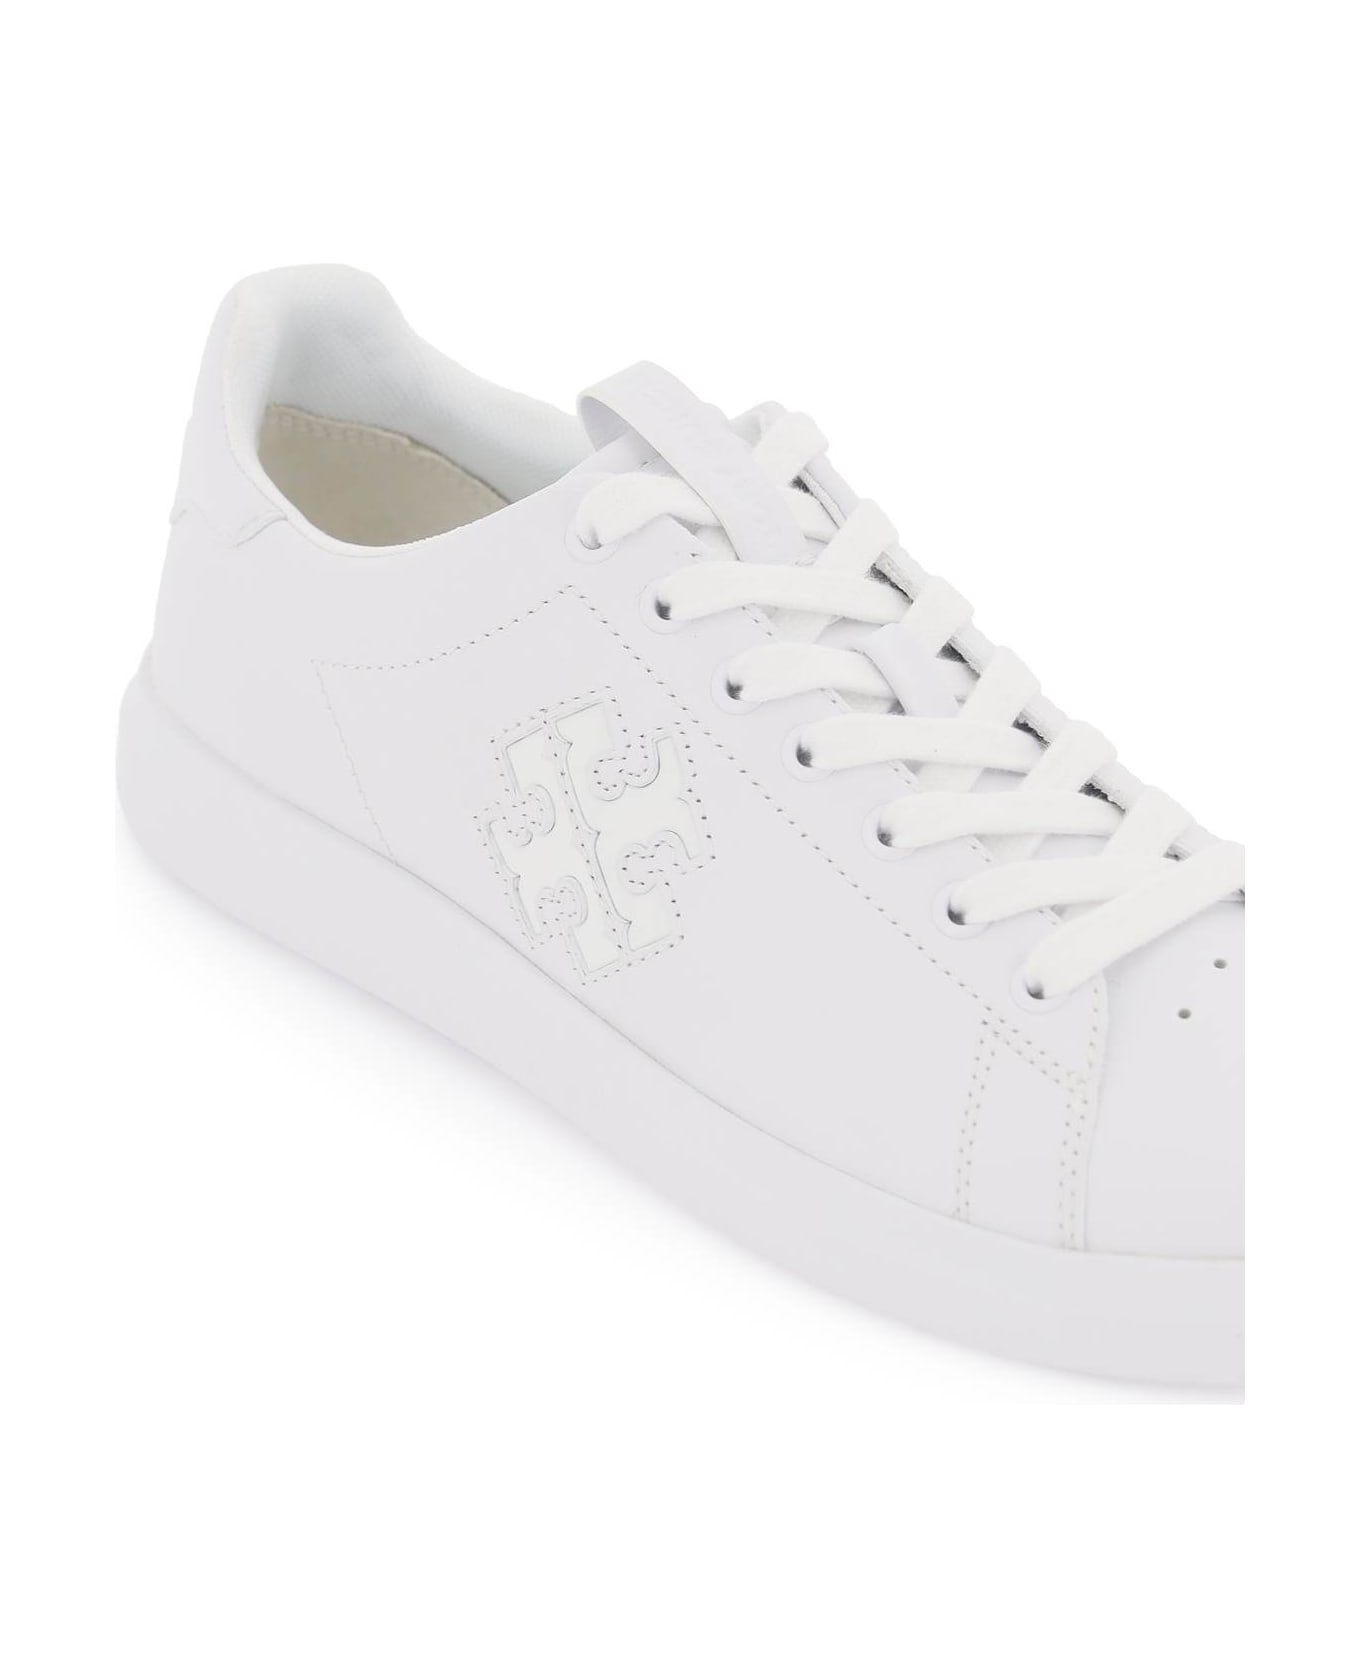 Tory Burch Double T Howell Court Leather Sneakers - White